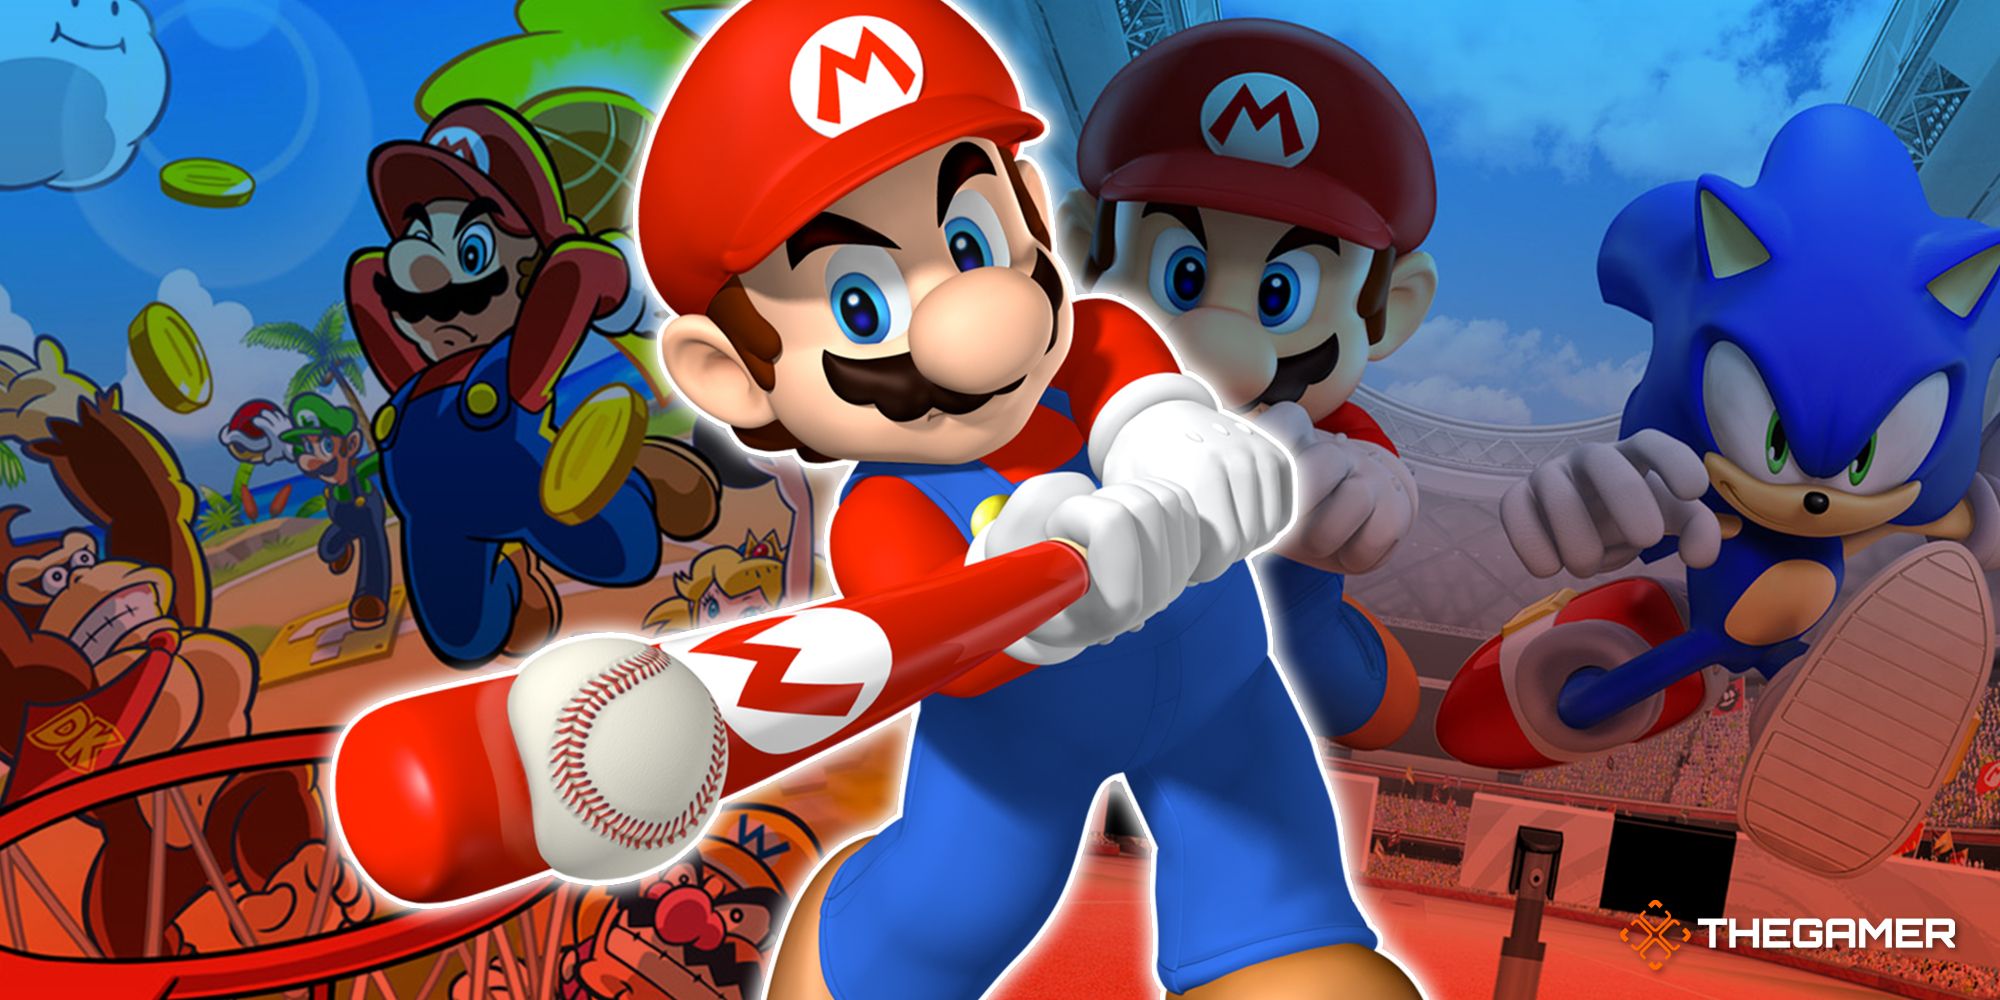 Exciting Nintendo Sports Games